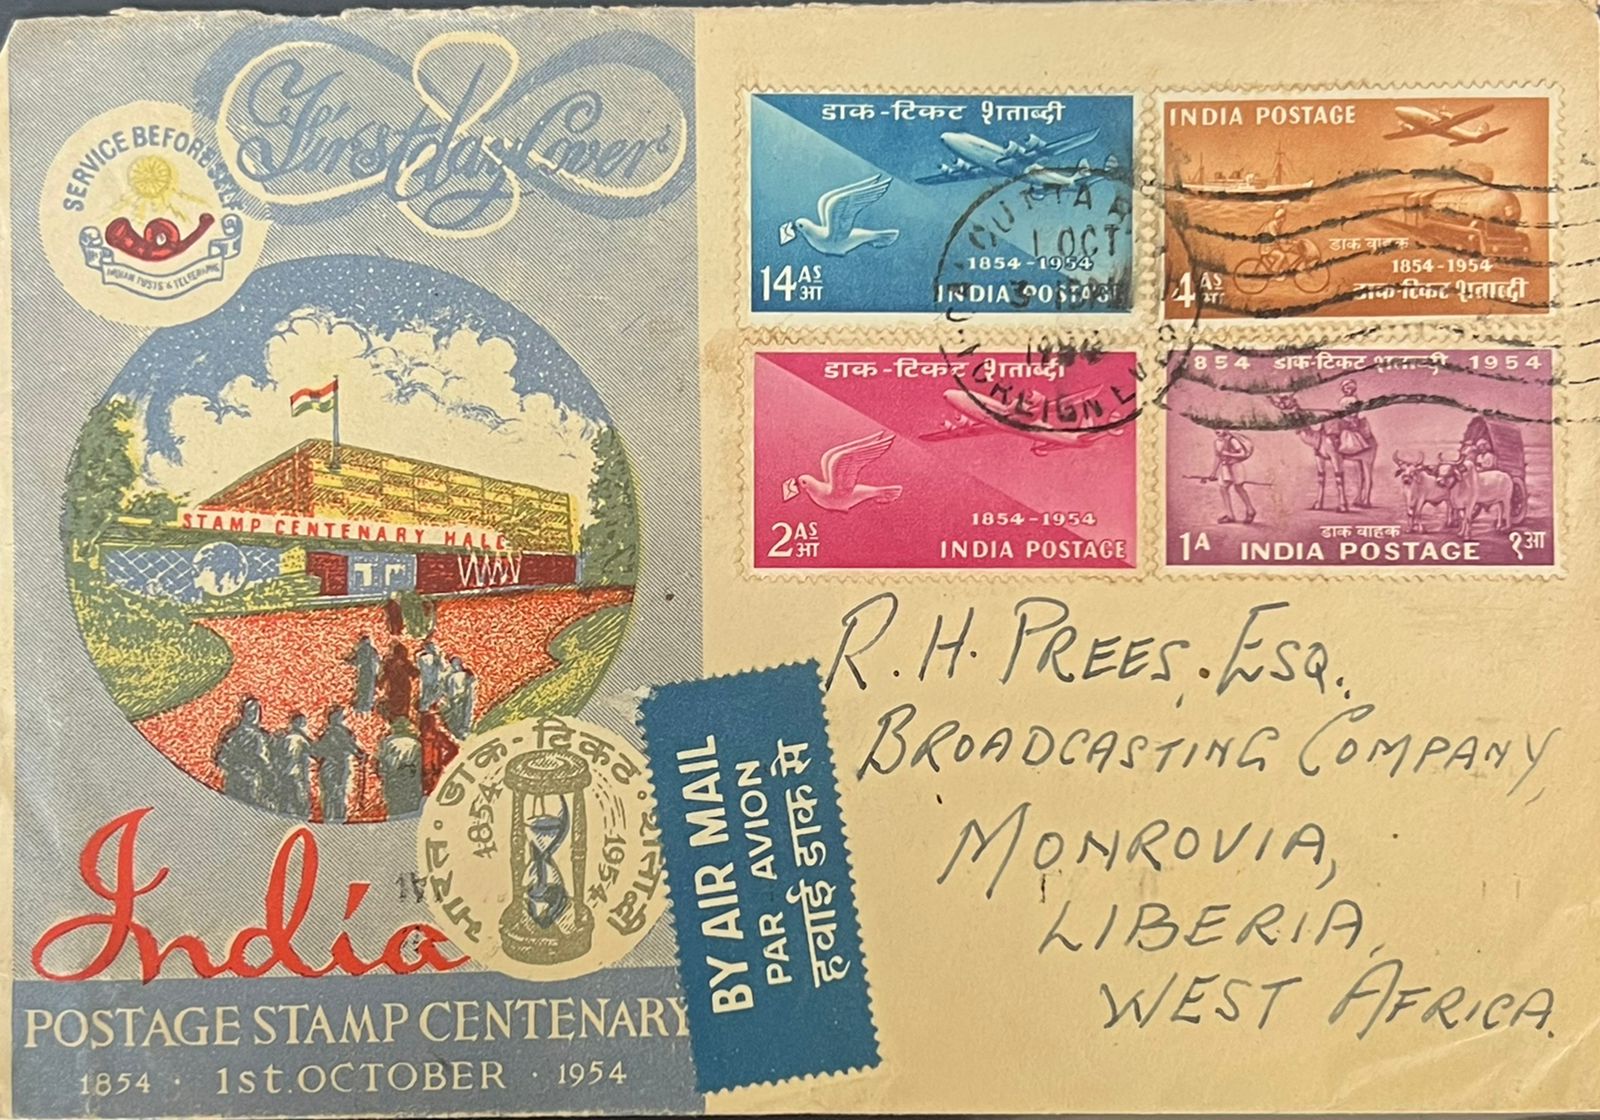 India 1954 Stamp Centenary FDC First Day Cover delivered to Liberia Rare country!